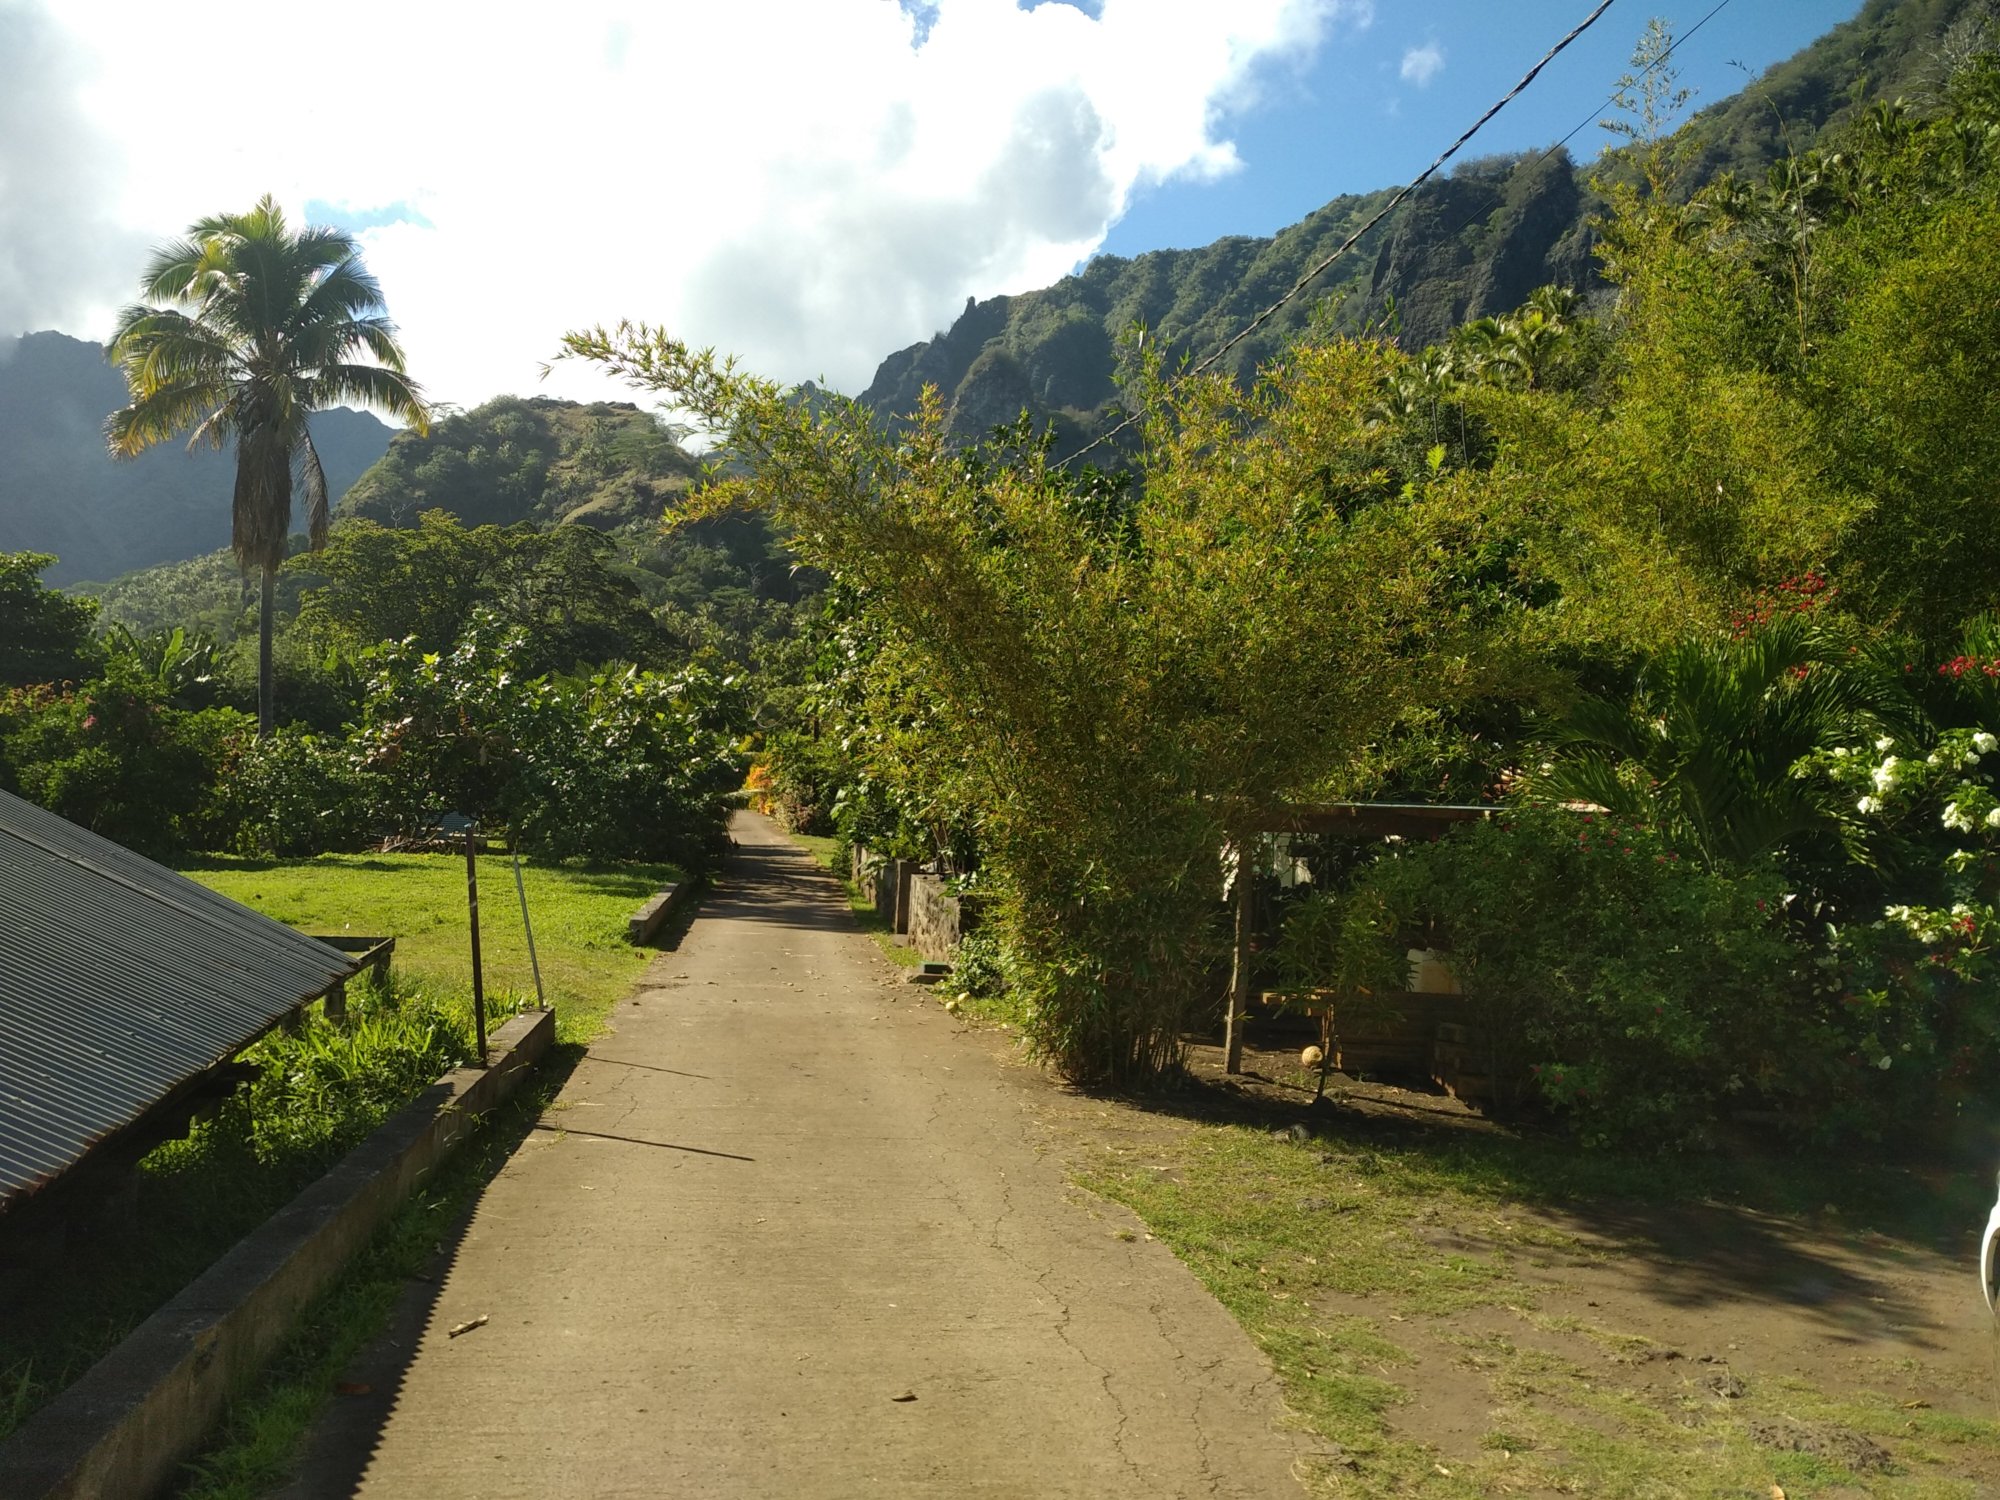 Land, we see LAND! Welcome to Fatu Hiva! images/2023/fh/6.jpg